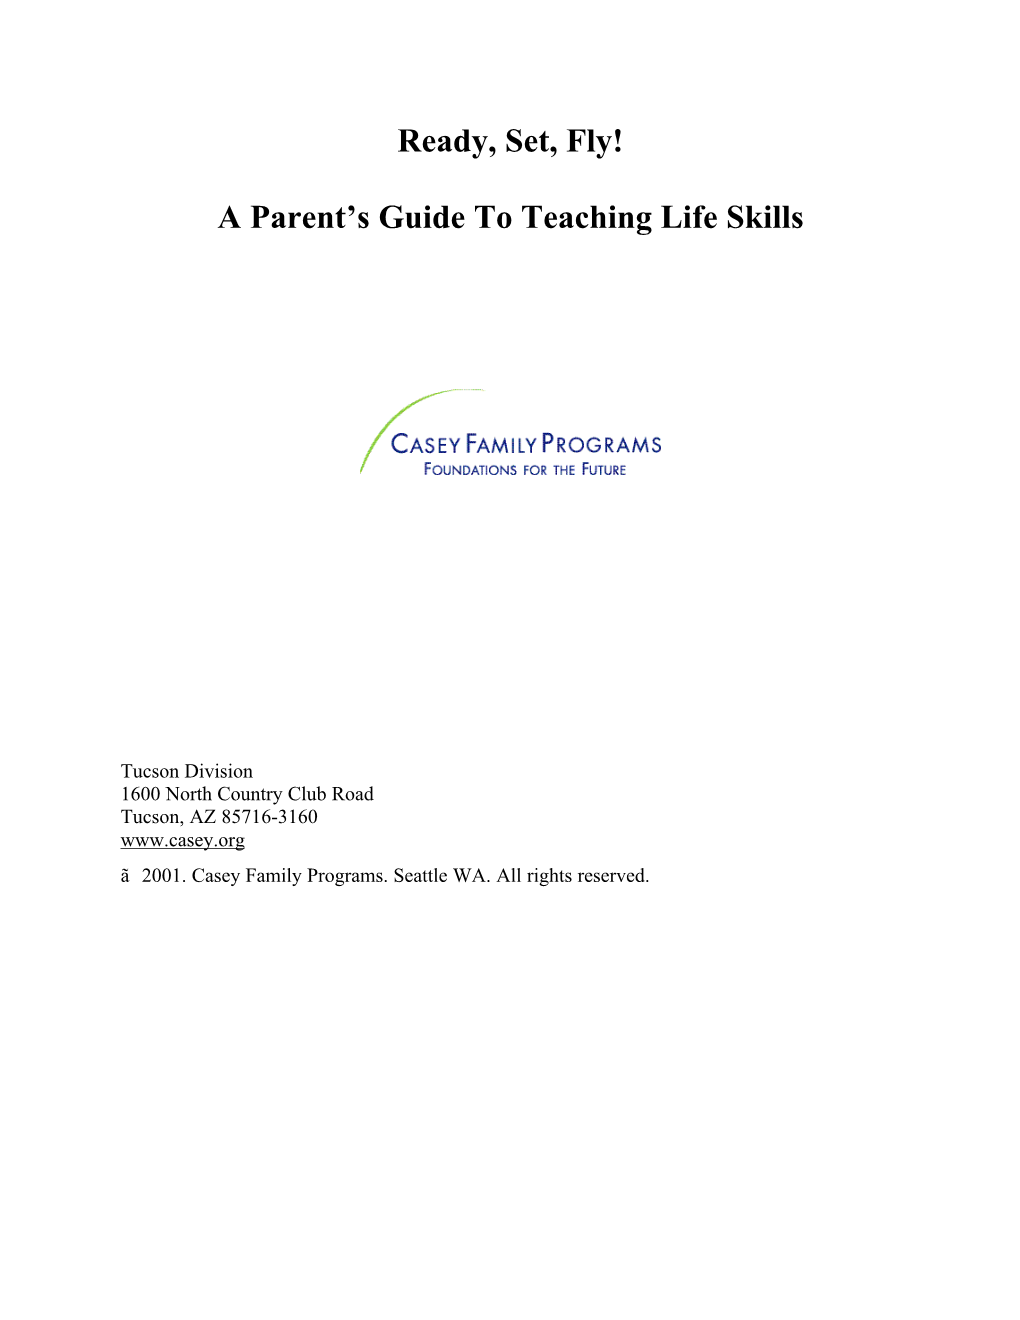 Ready, Set, Fly! a Parent's Guide to Teaching Life Skills